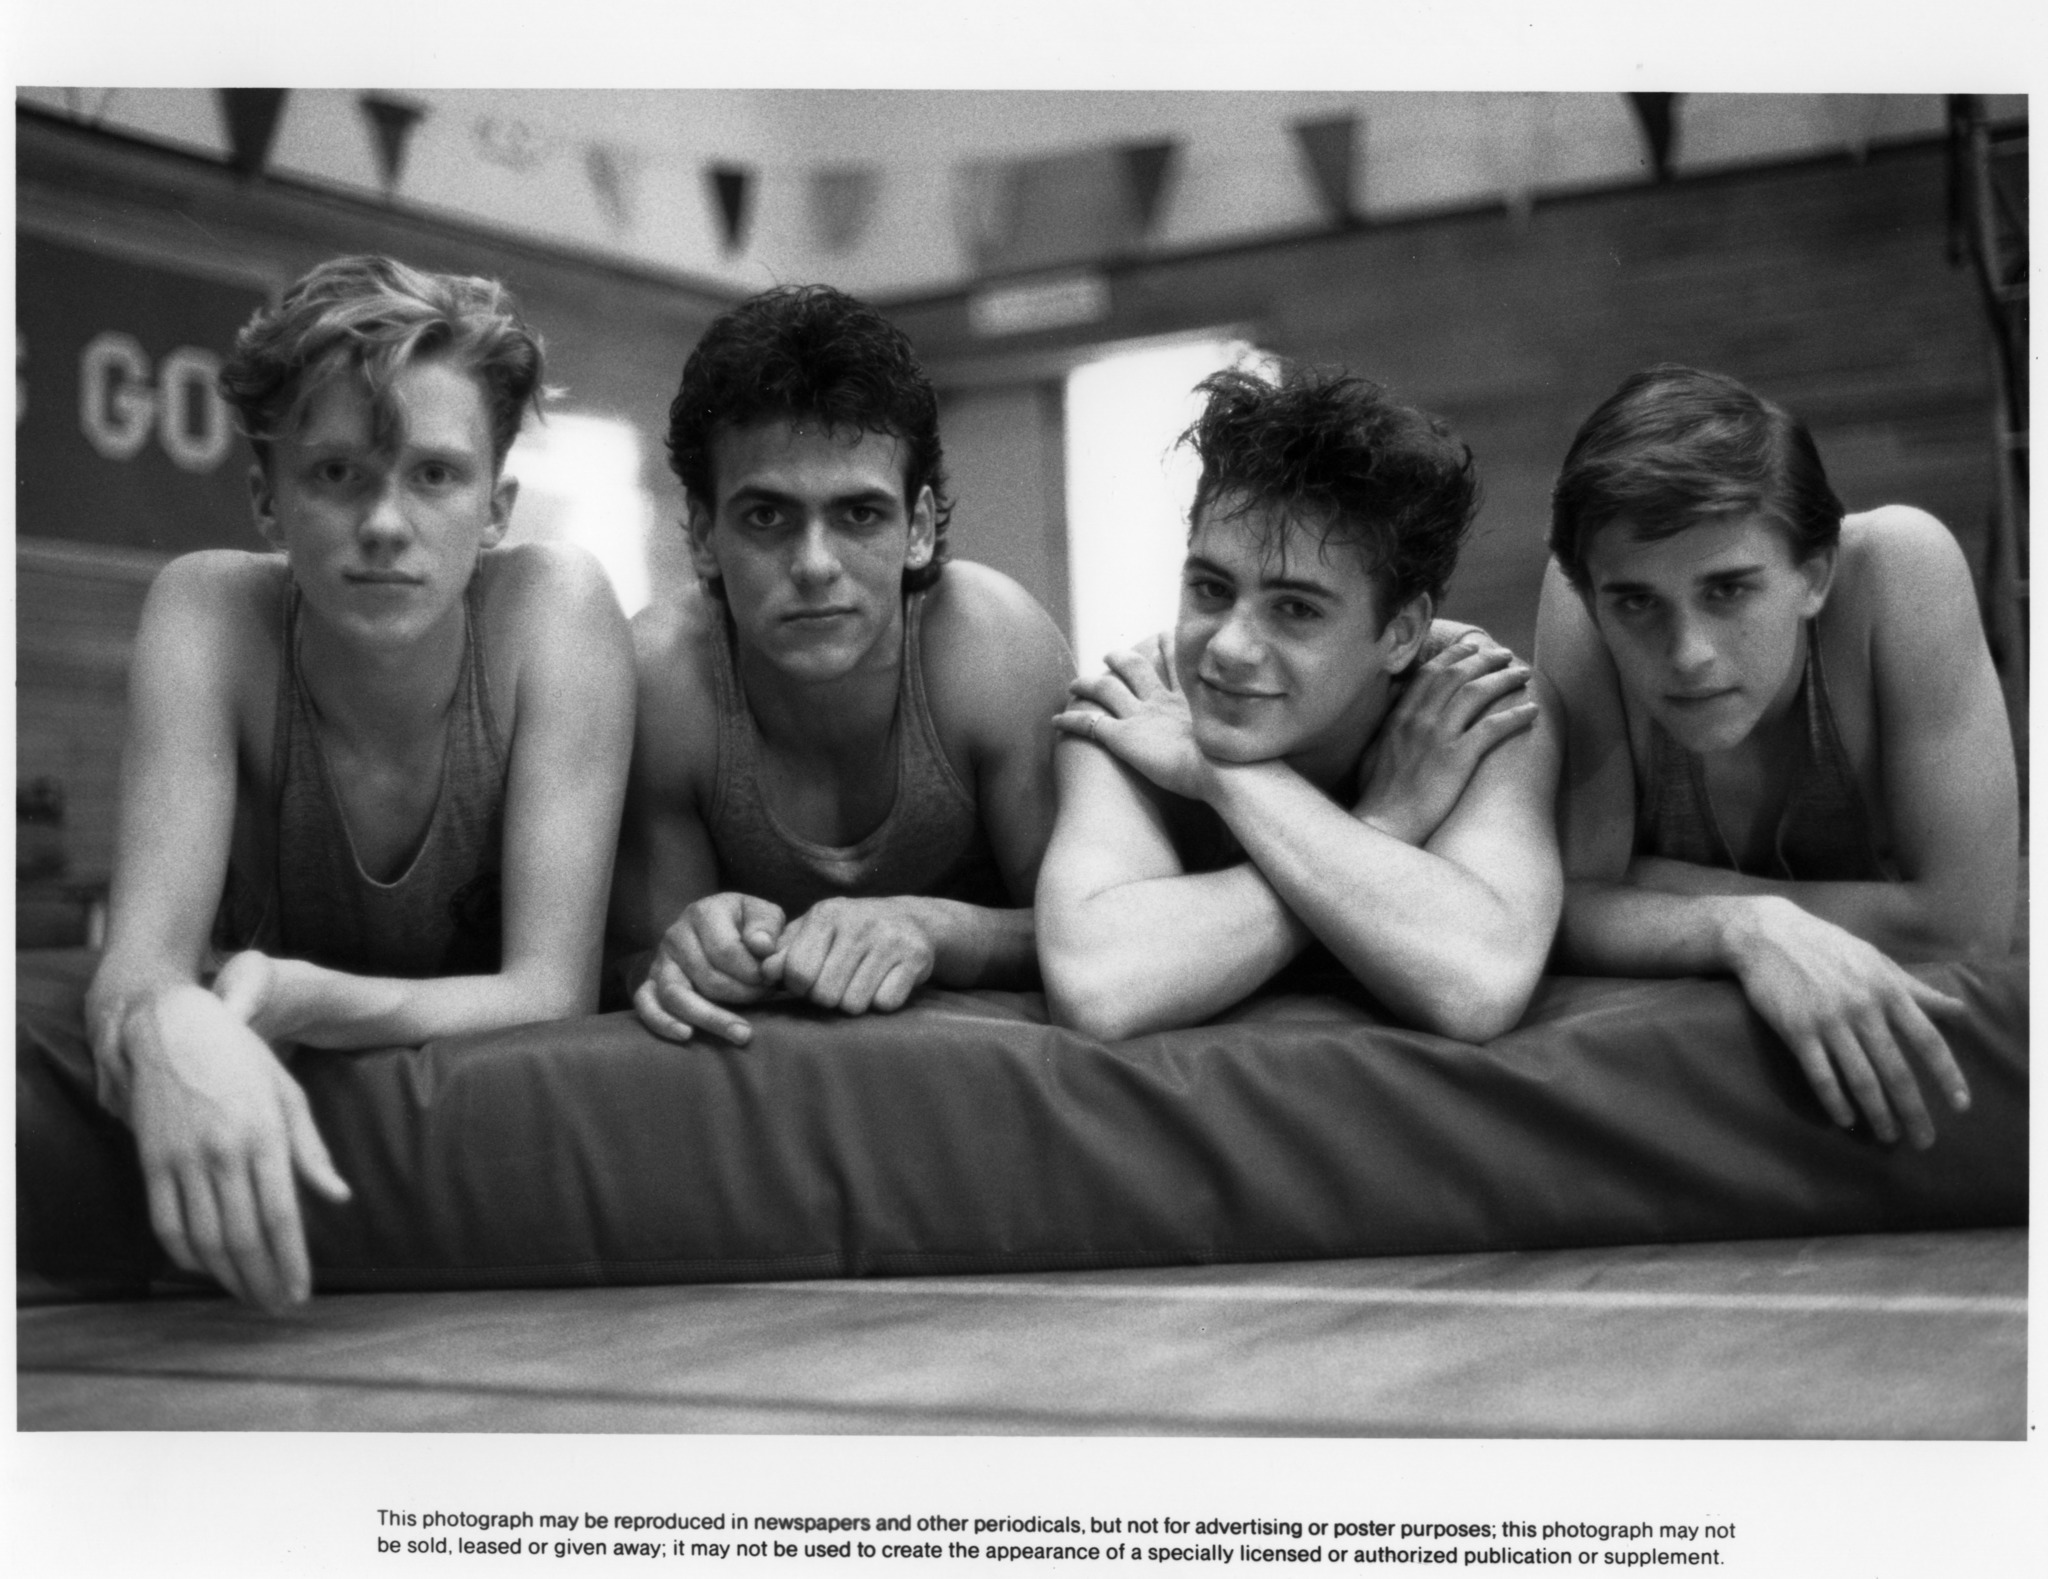 Robert Downey Jr., Anthony Michael Hall, Ilan Mitchell-Smith and Robert Rusler in Weird Science (1985)